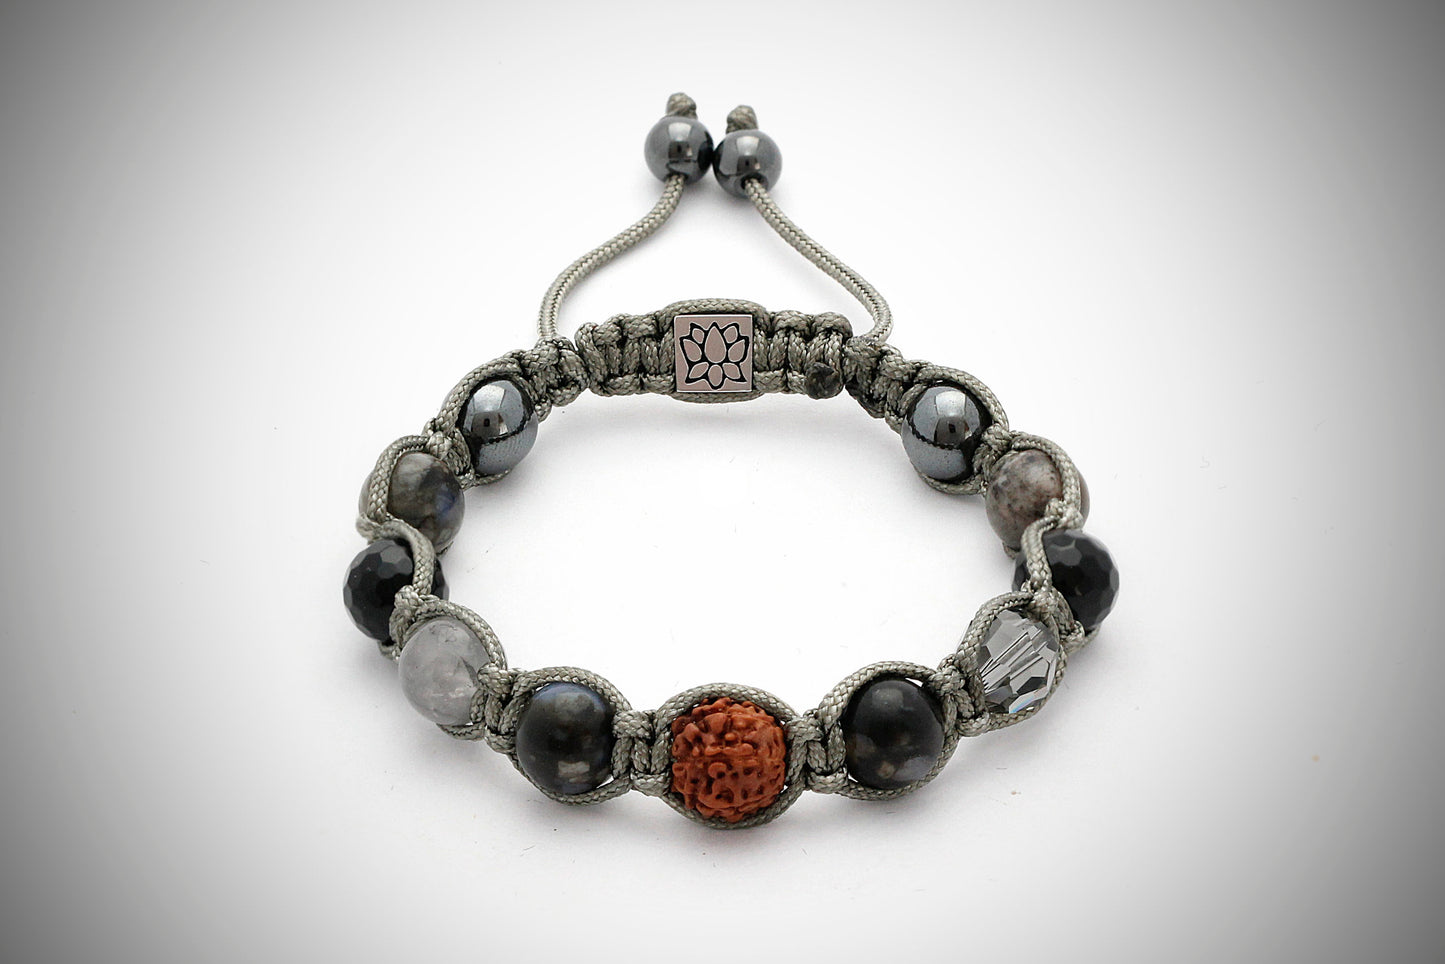 Basha Miracle Beads Bracelet - Weeping Willow Boutique